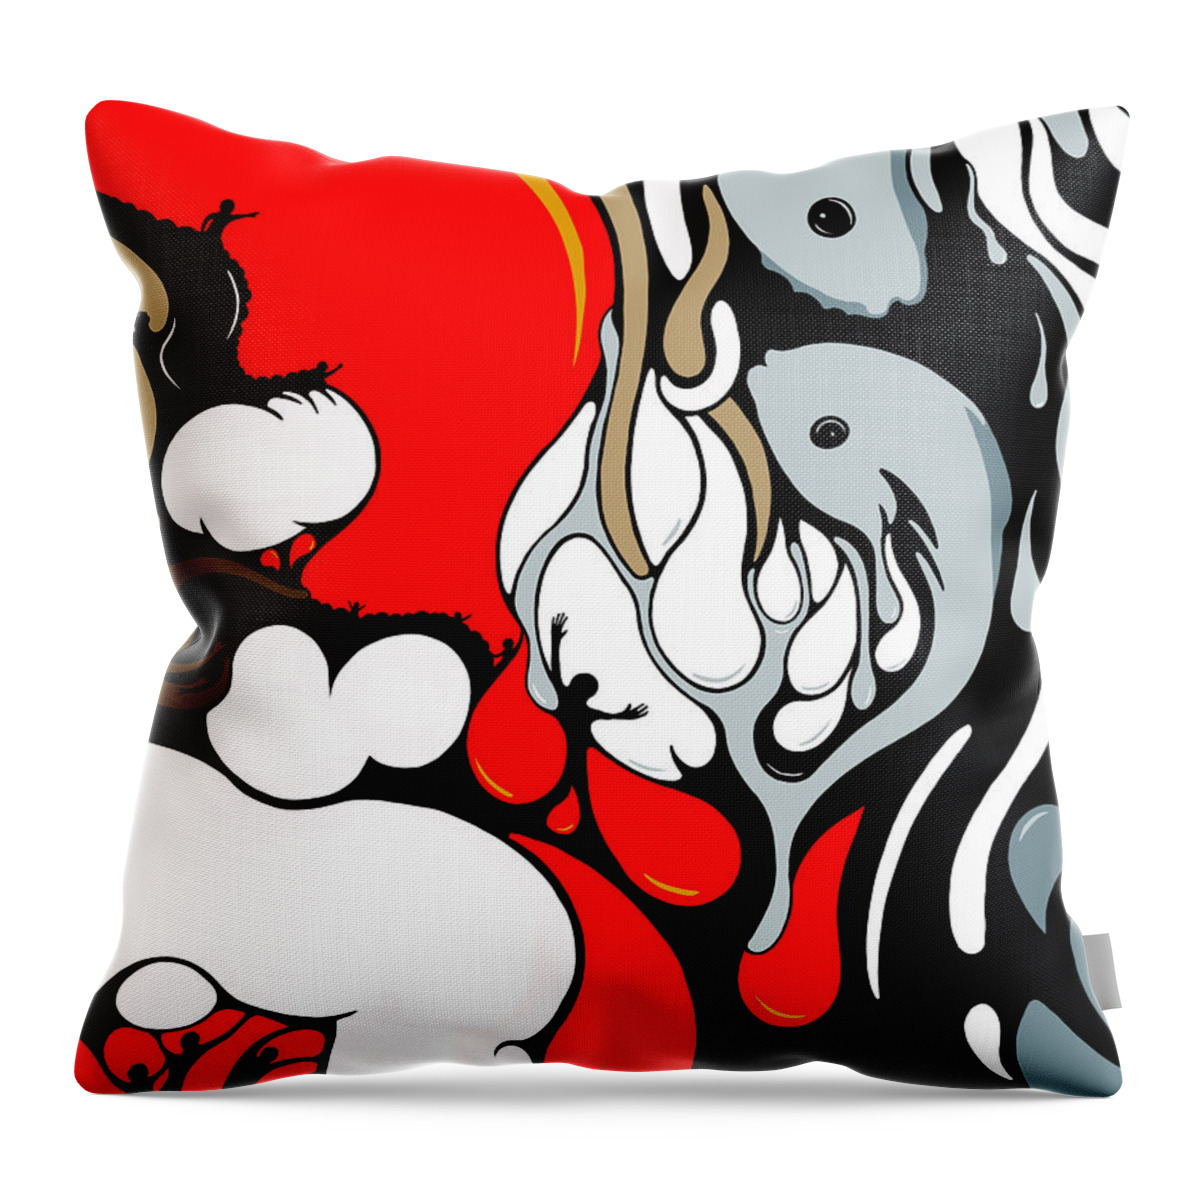 Female Throw Pillow featuring the digital art Boiling Point by Craig Tilley